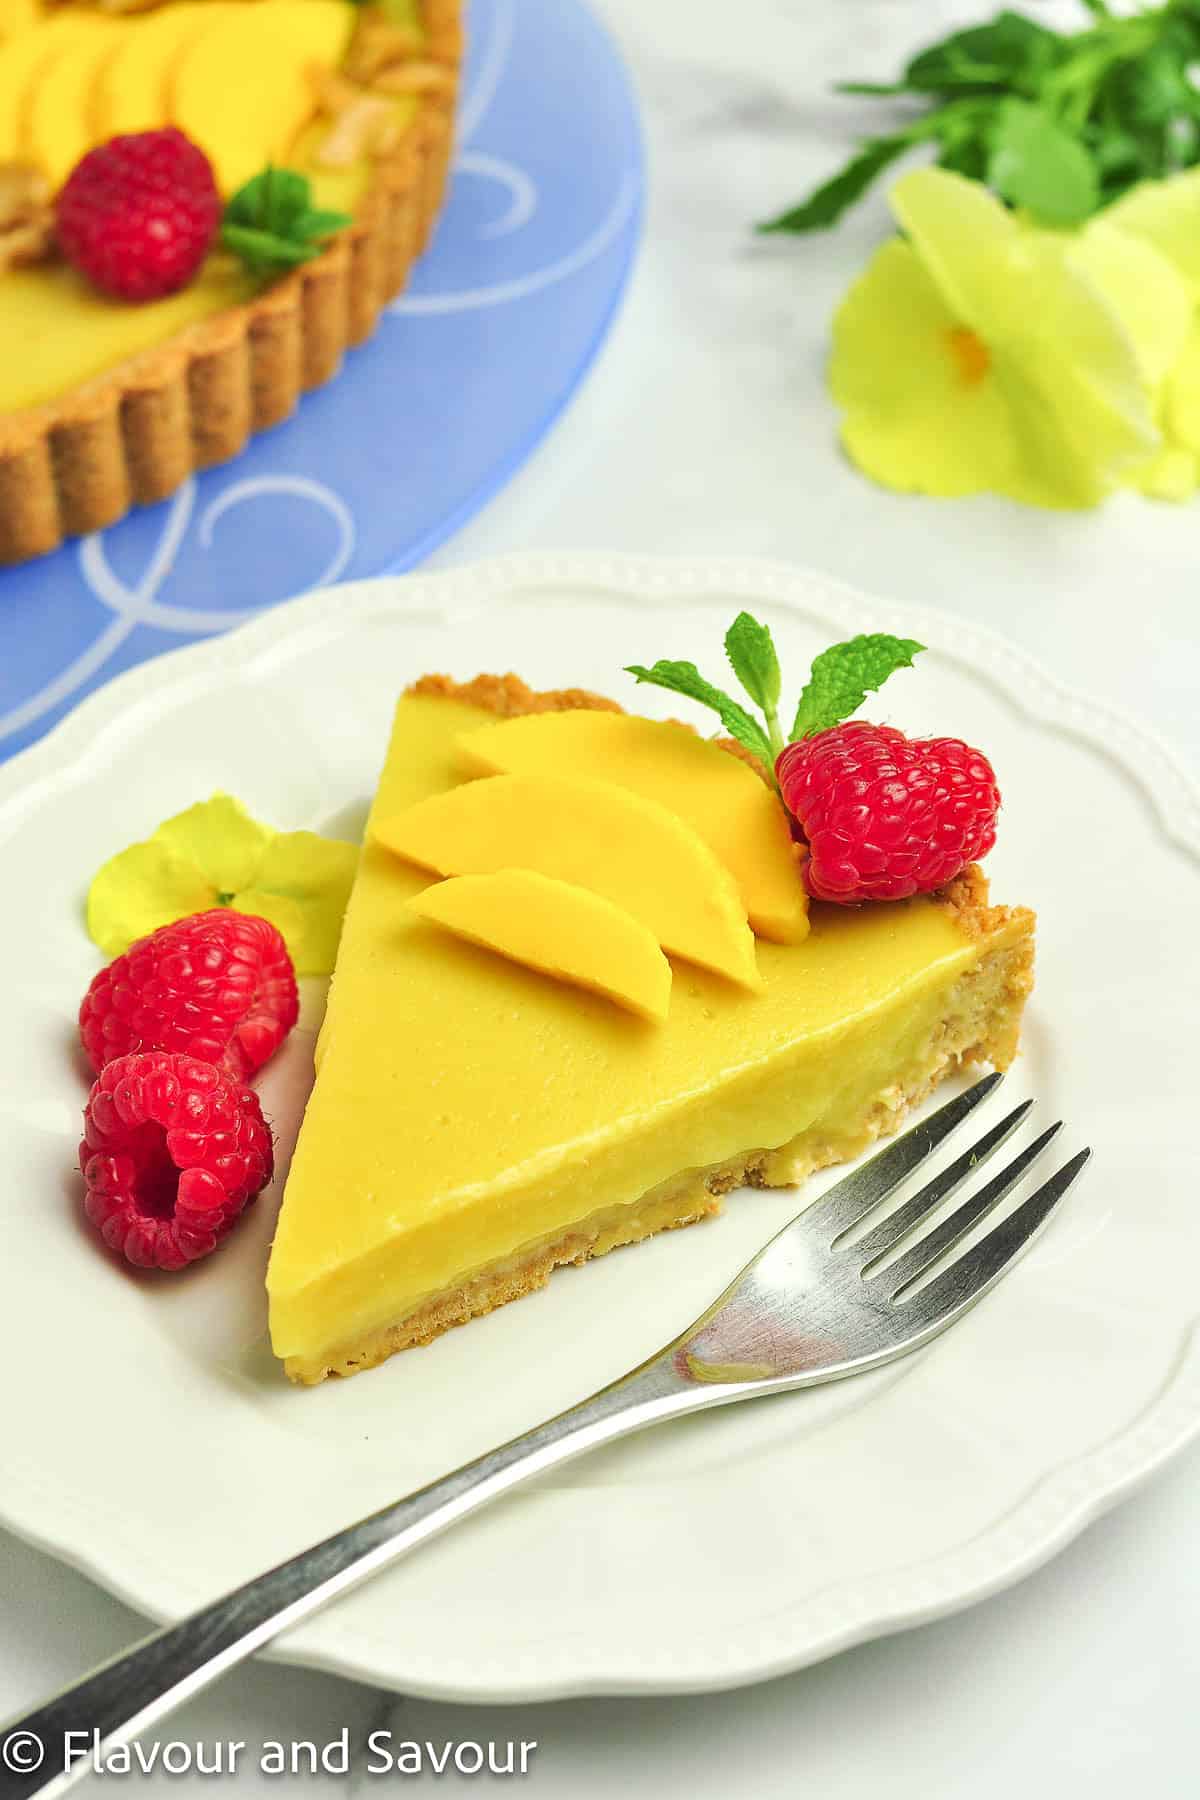 A slice of mango tart on a plate with raspberries and sliced mango.